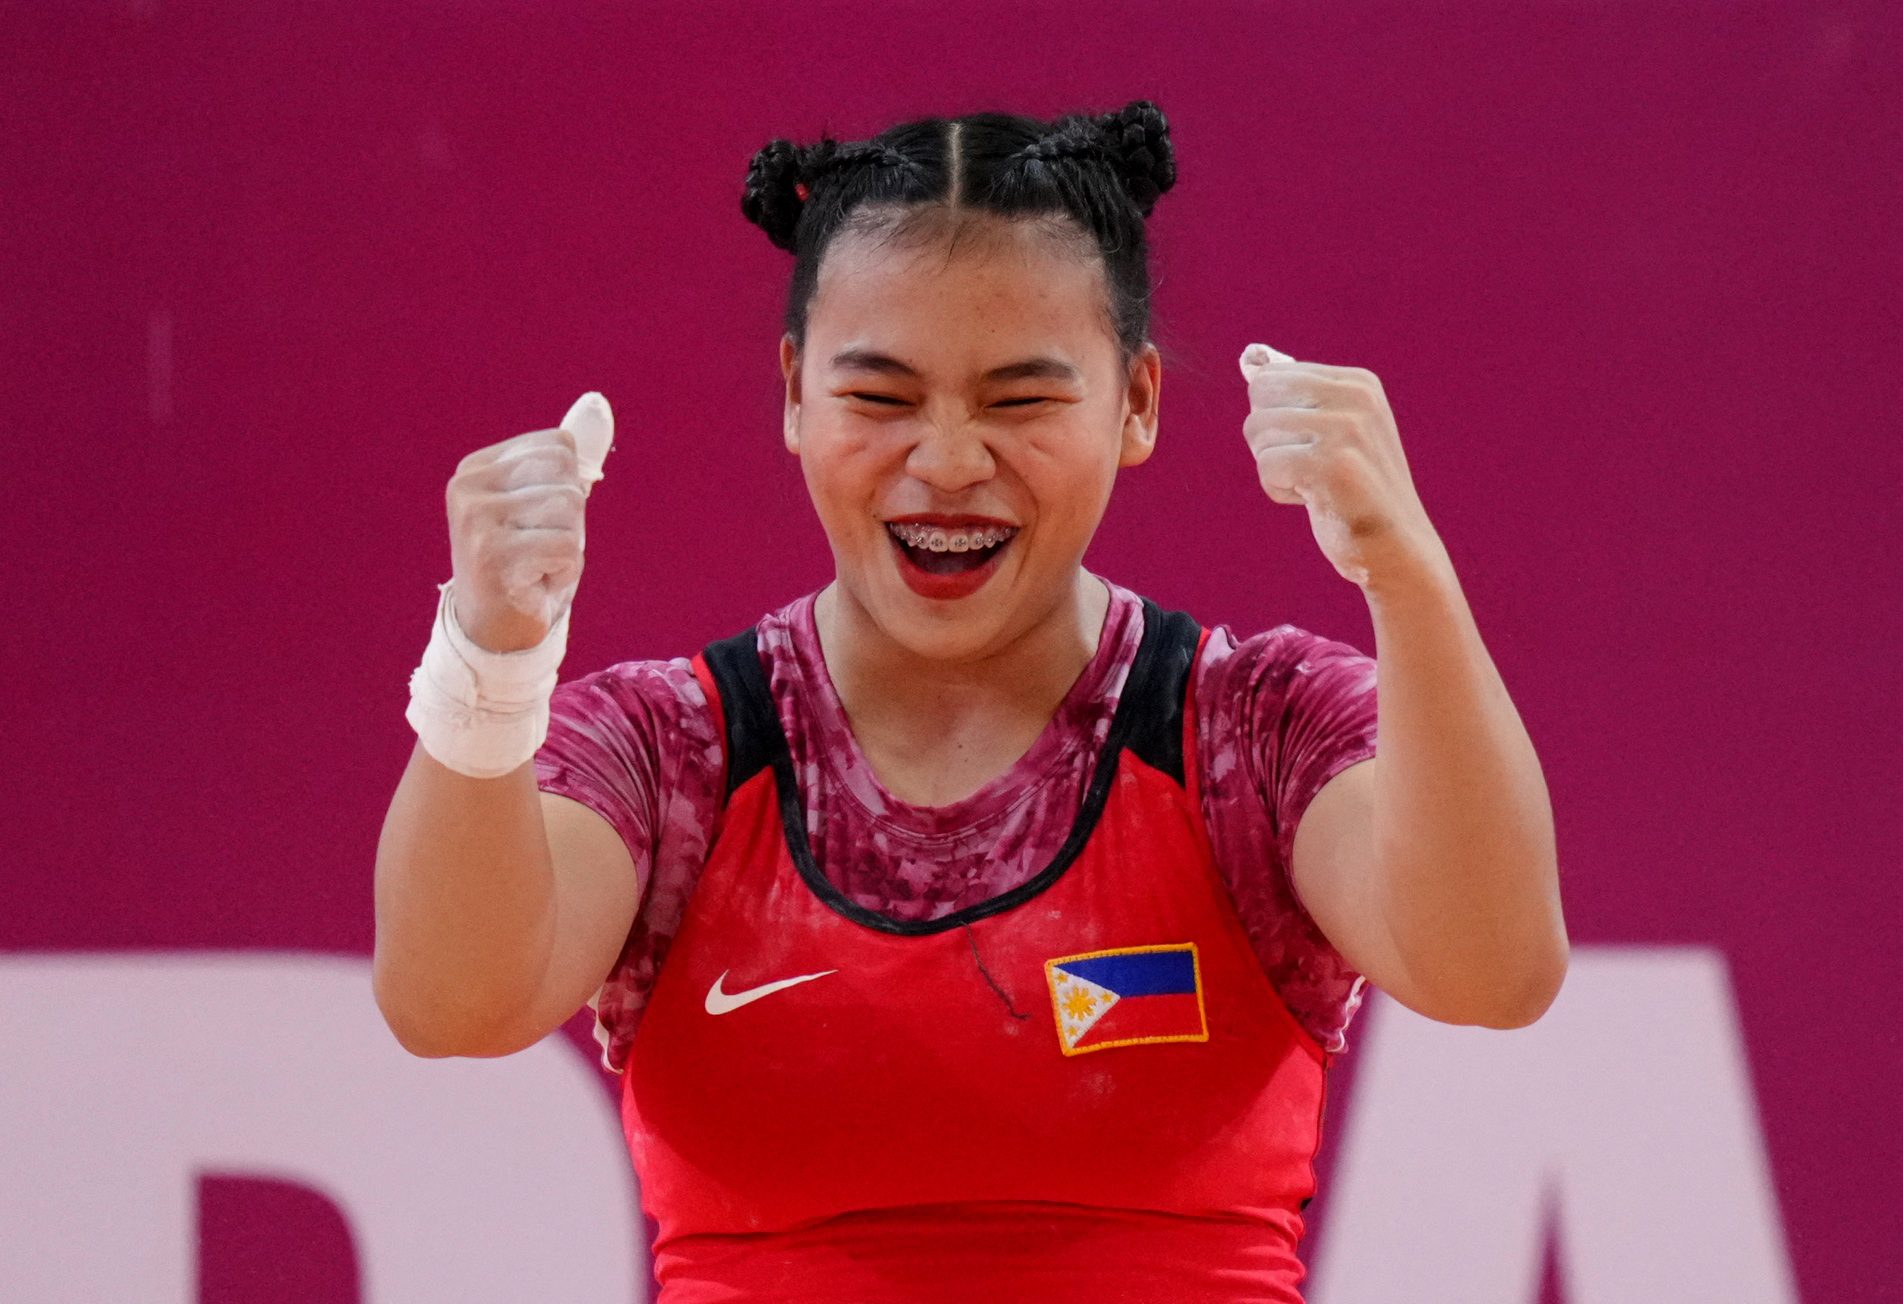 ‘Me versus me’: Sarno in class of her own after SEA Games repeat